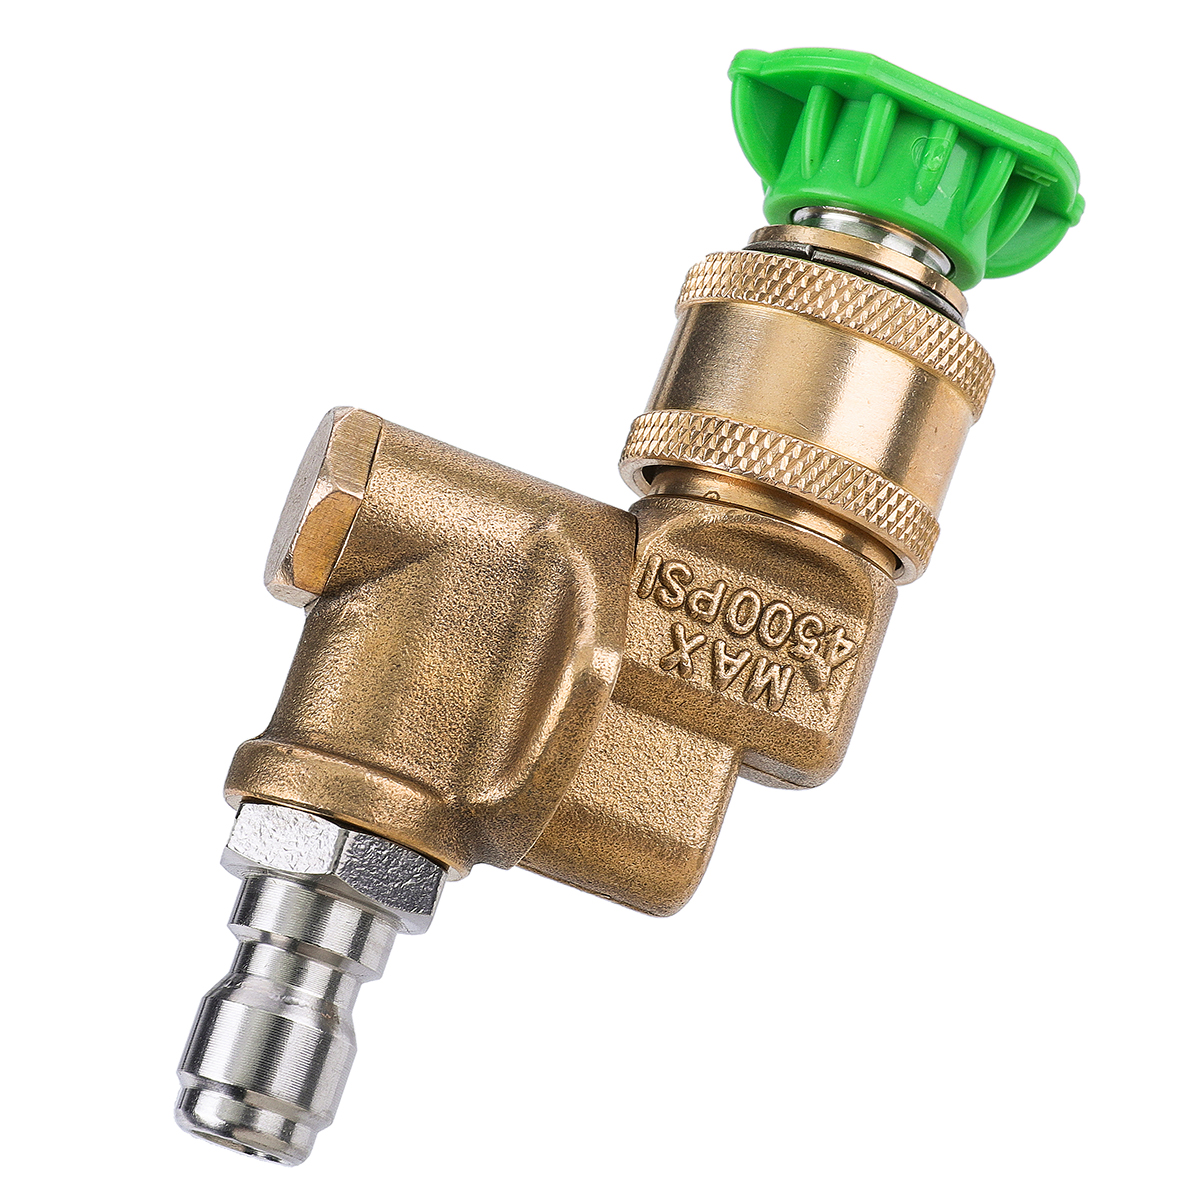 5Pcs-20-GPM-High-Pressure-Washer-Spray-Nozzle-Tips-with-Connector-14-Inch-Quick-connect-4500PSI-90de-1594773-5